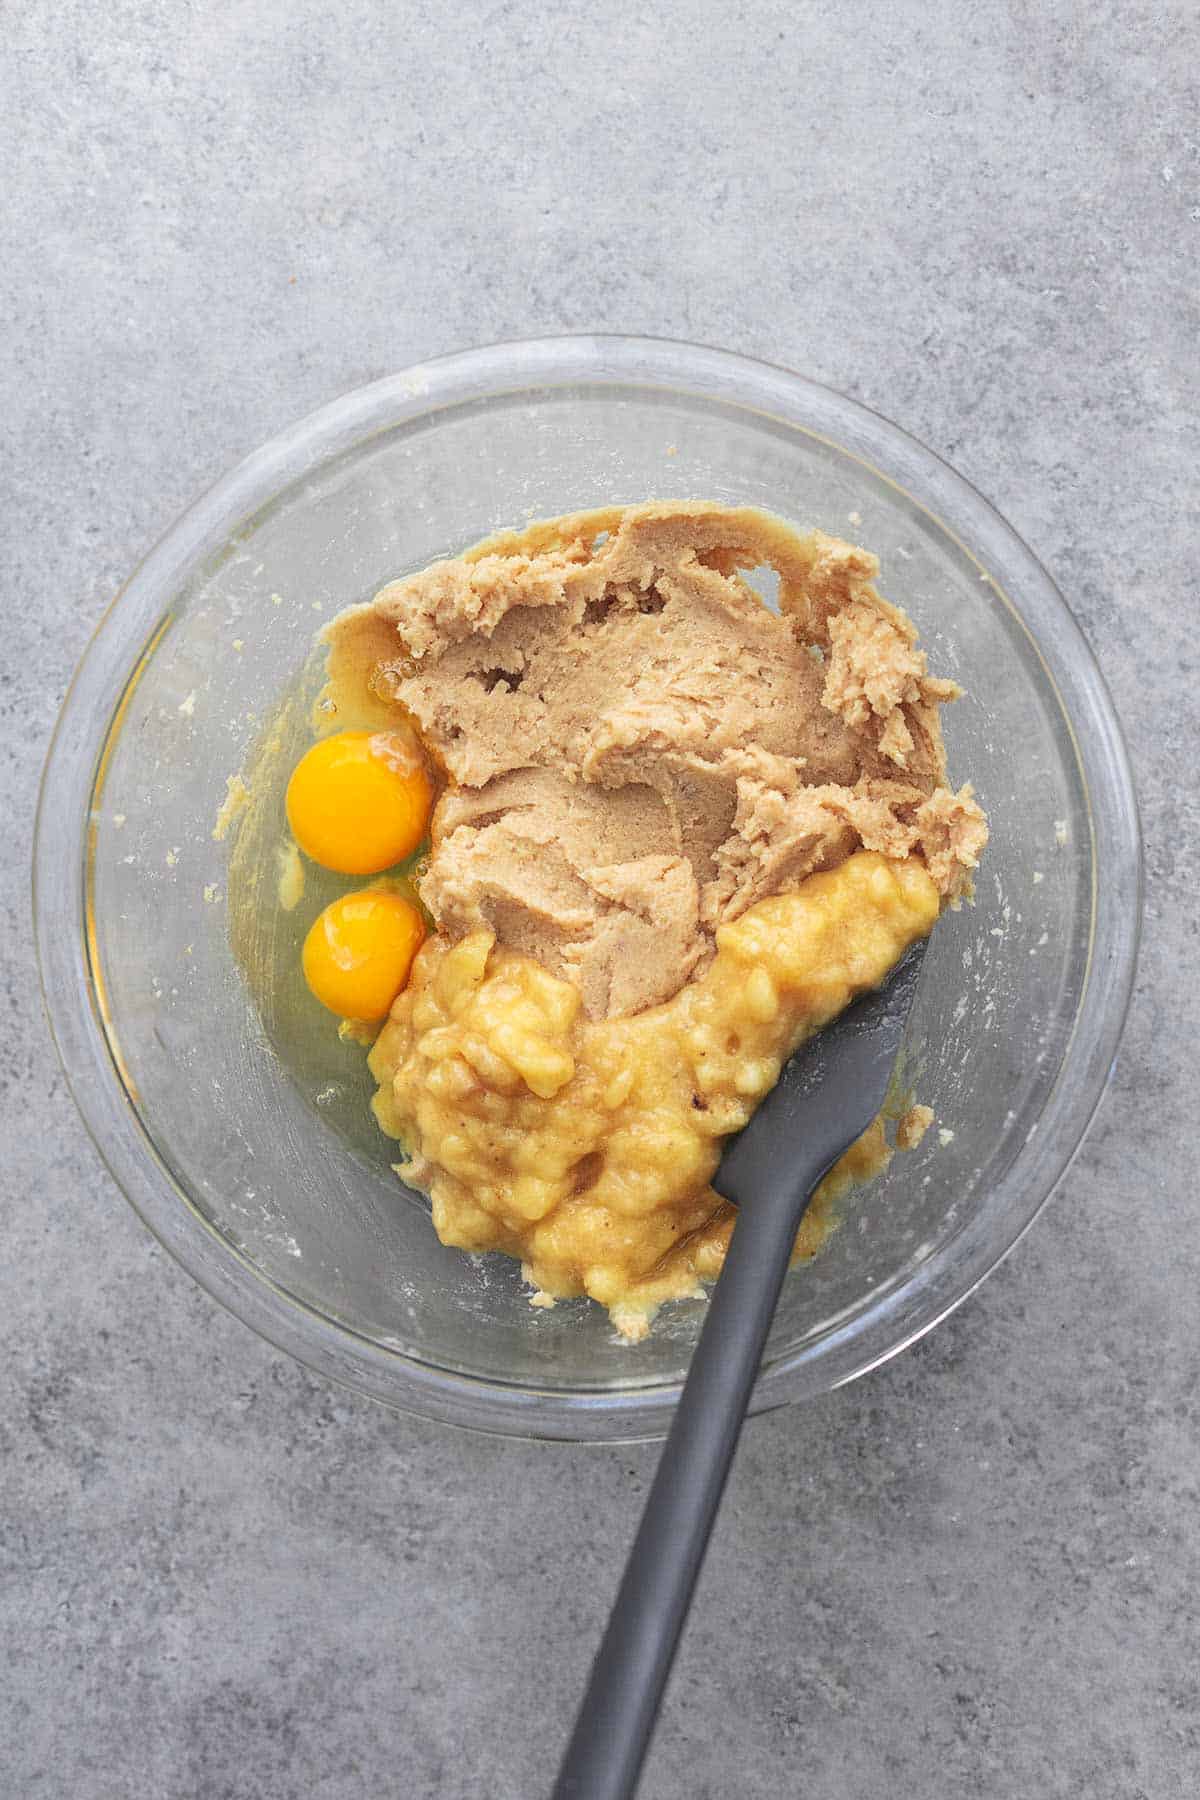 top view of mashed banana, creamy brown mixture, and egg yolks in a glass bowl with a spatula.